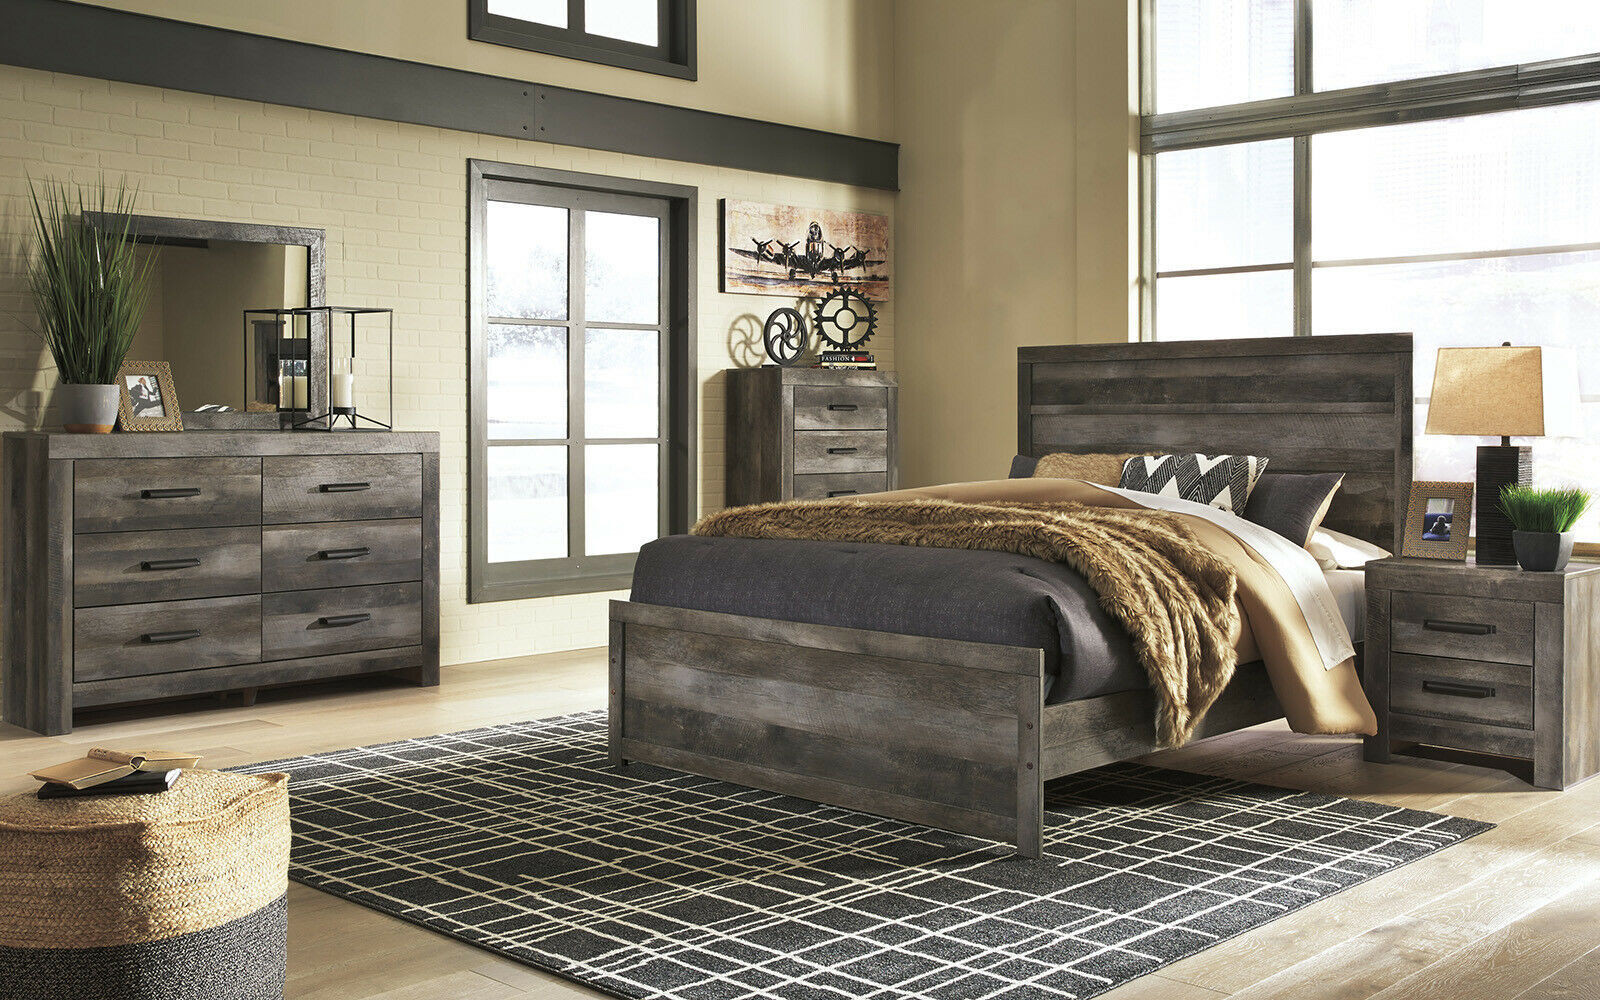 Rustic King Size Bedroom Sets
 NEW Modern Rustic Gray Finish 5 pieces Bedroom Set w King